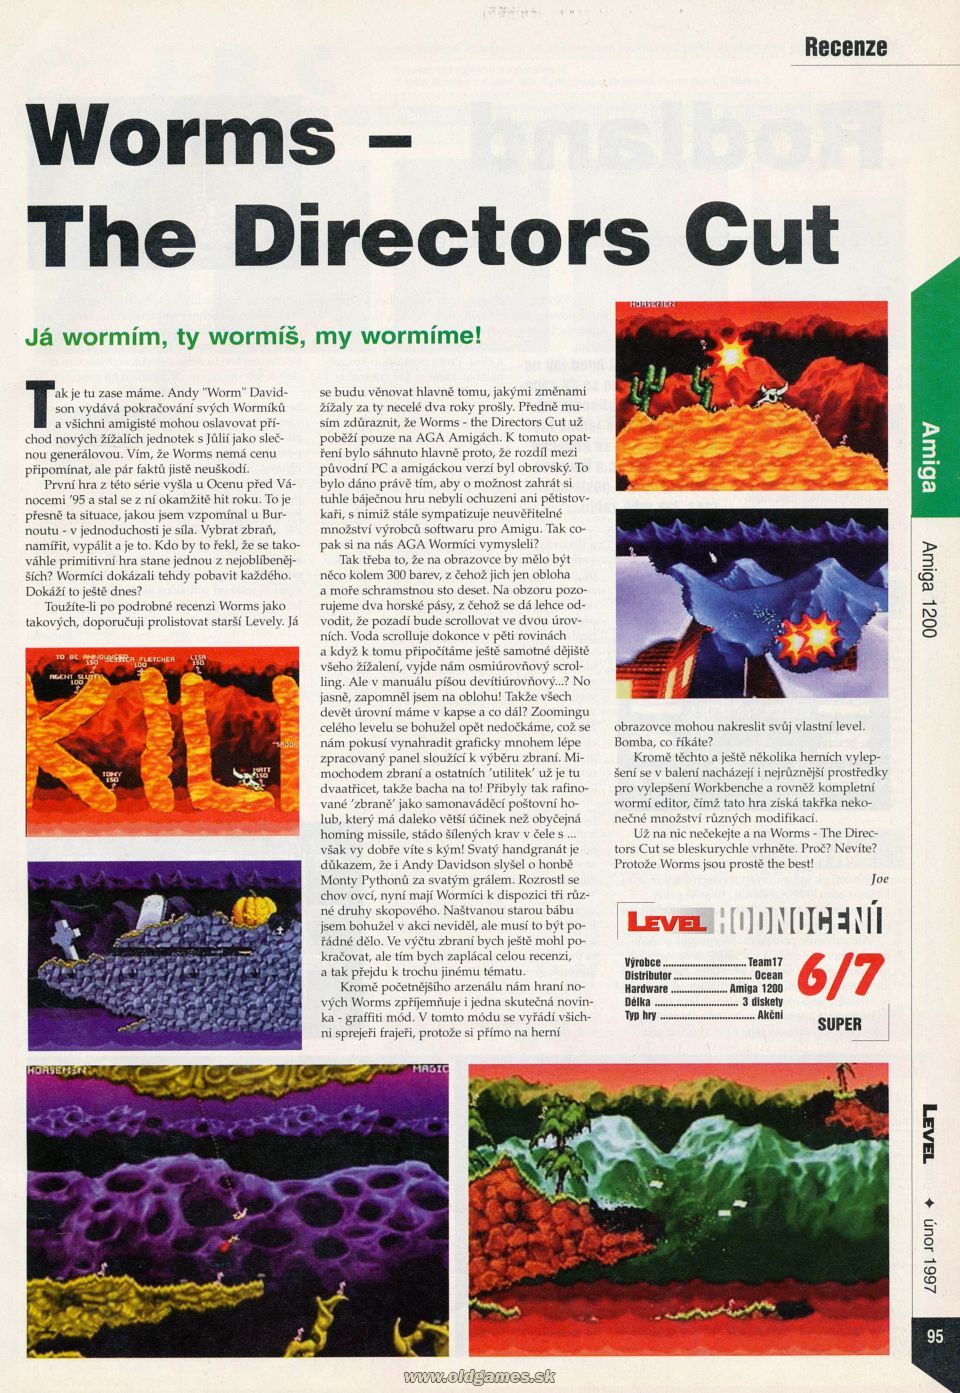 Worms - The Directors Cut